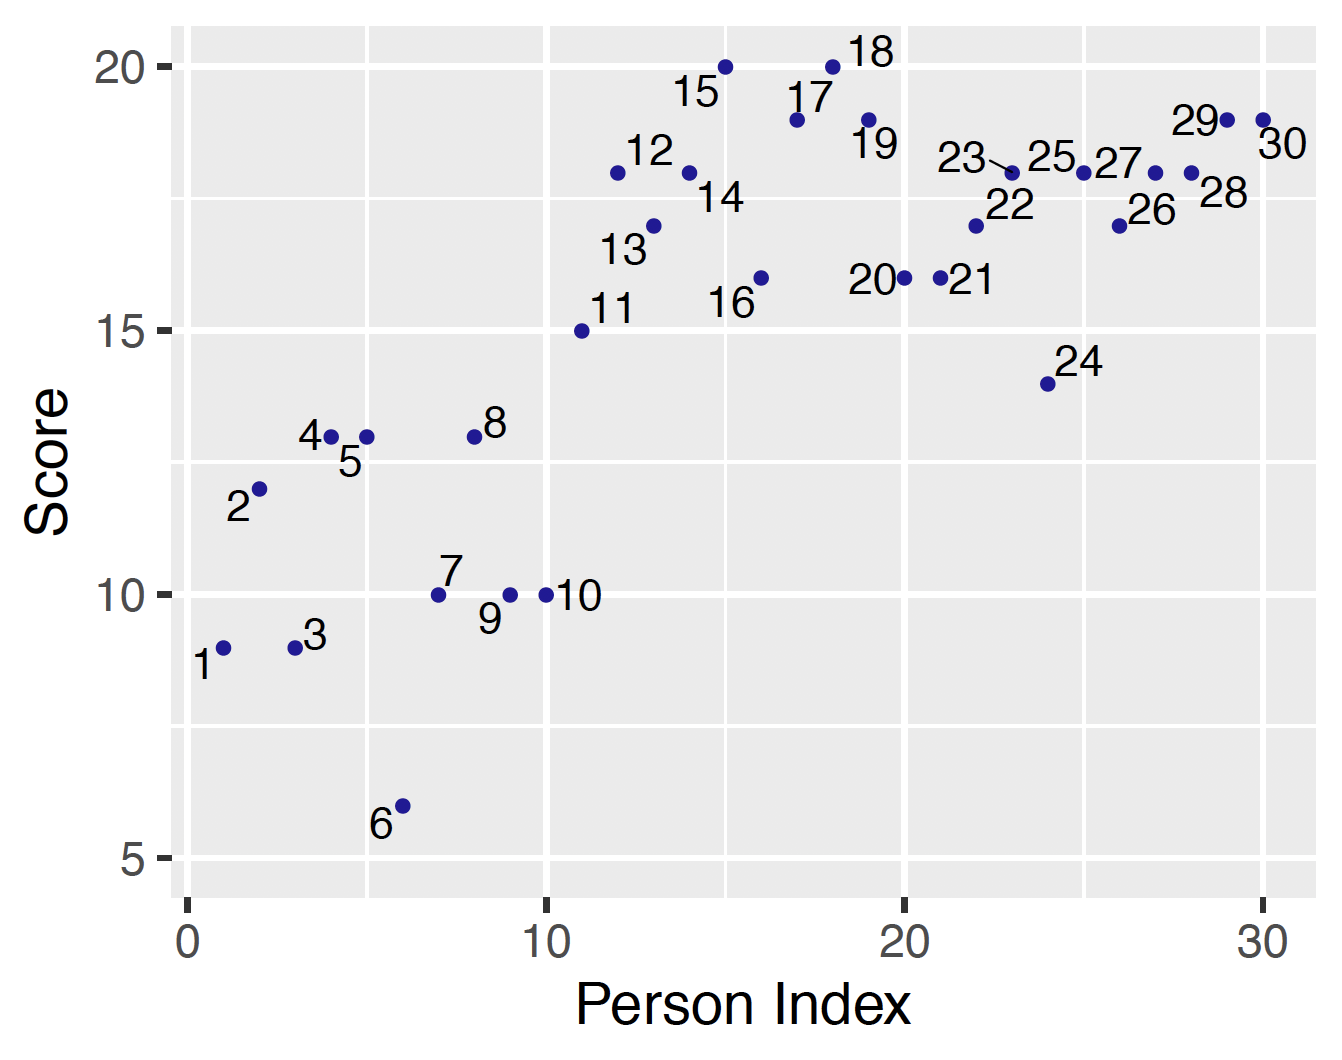 Scatterplot of test scores of 20 test takers. The number next to each point is the person index.